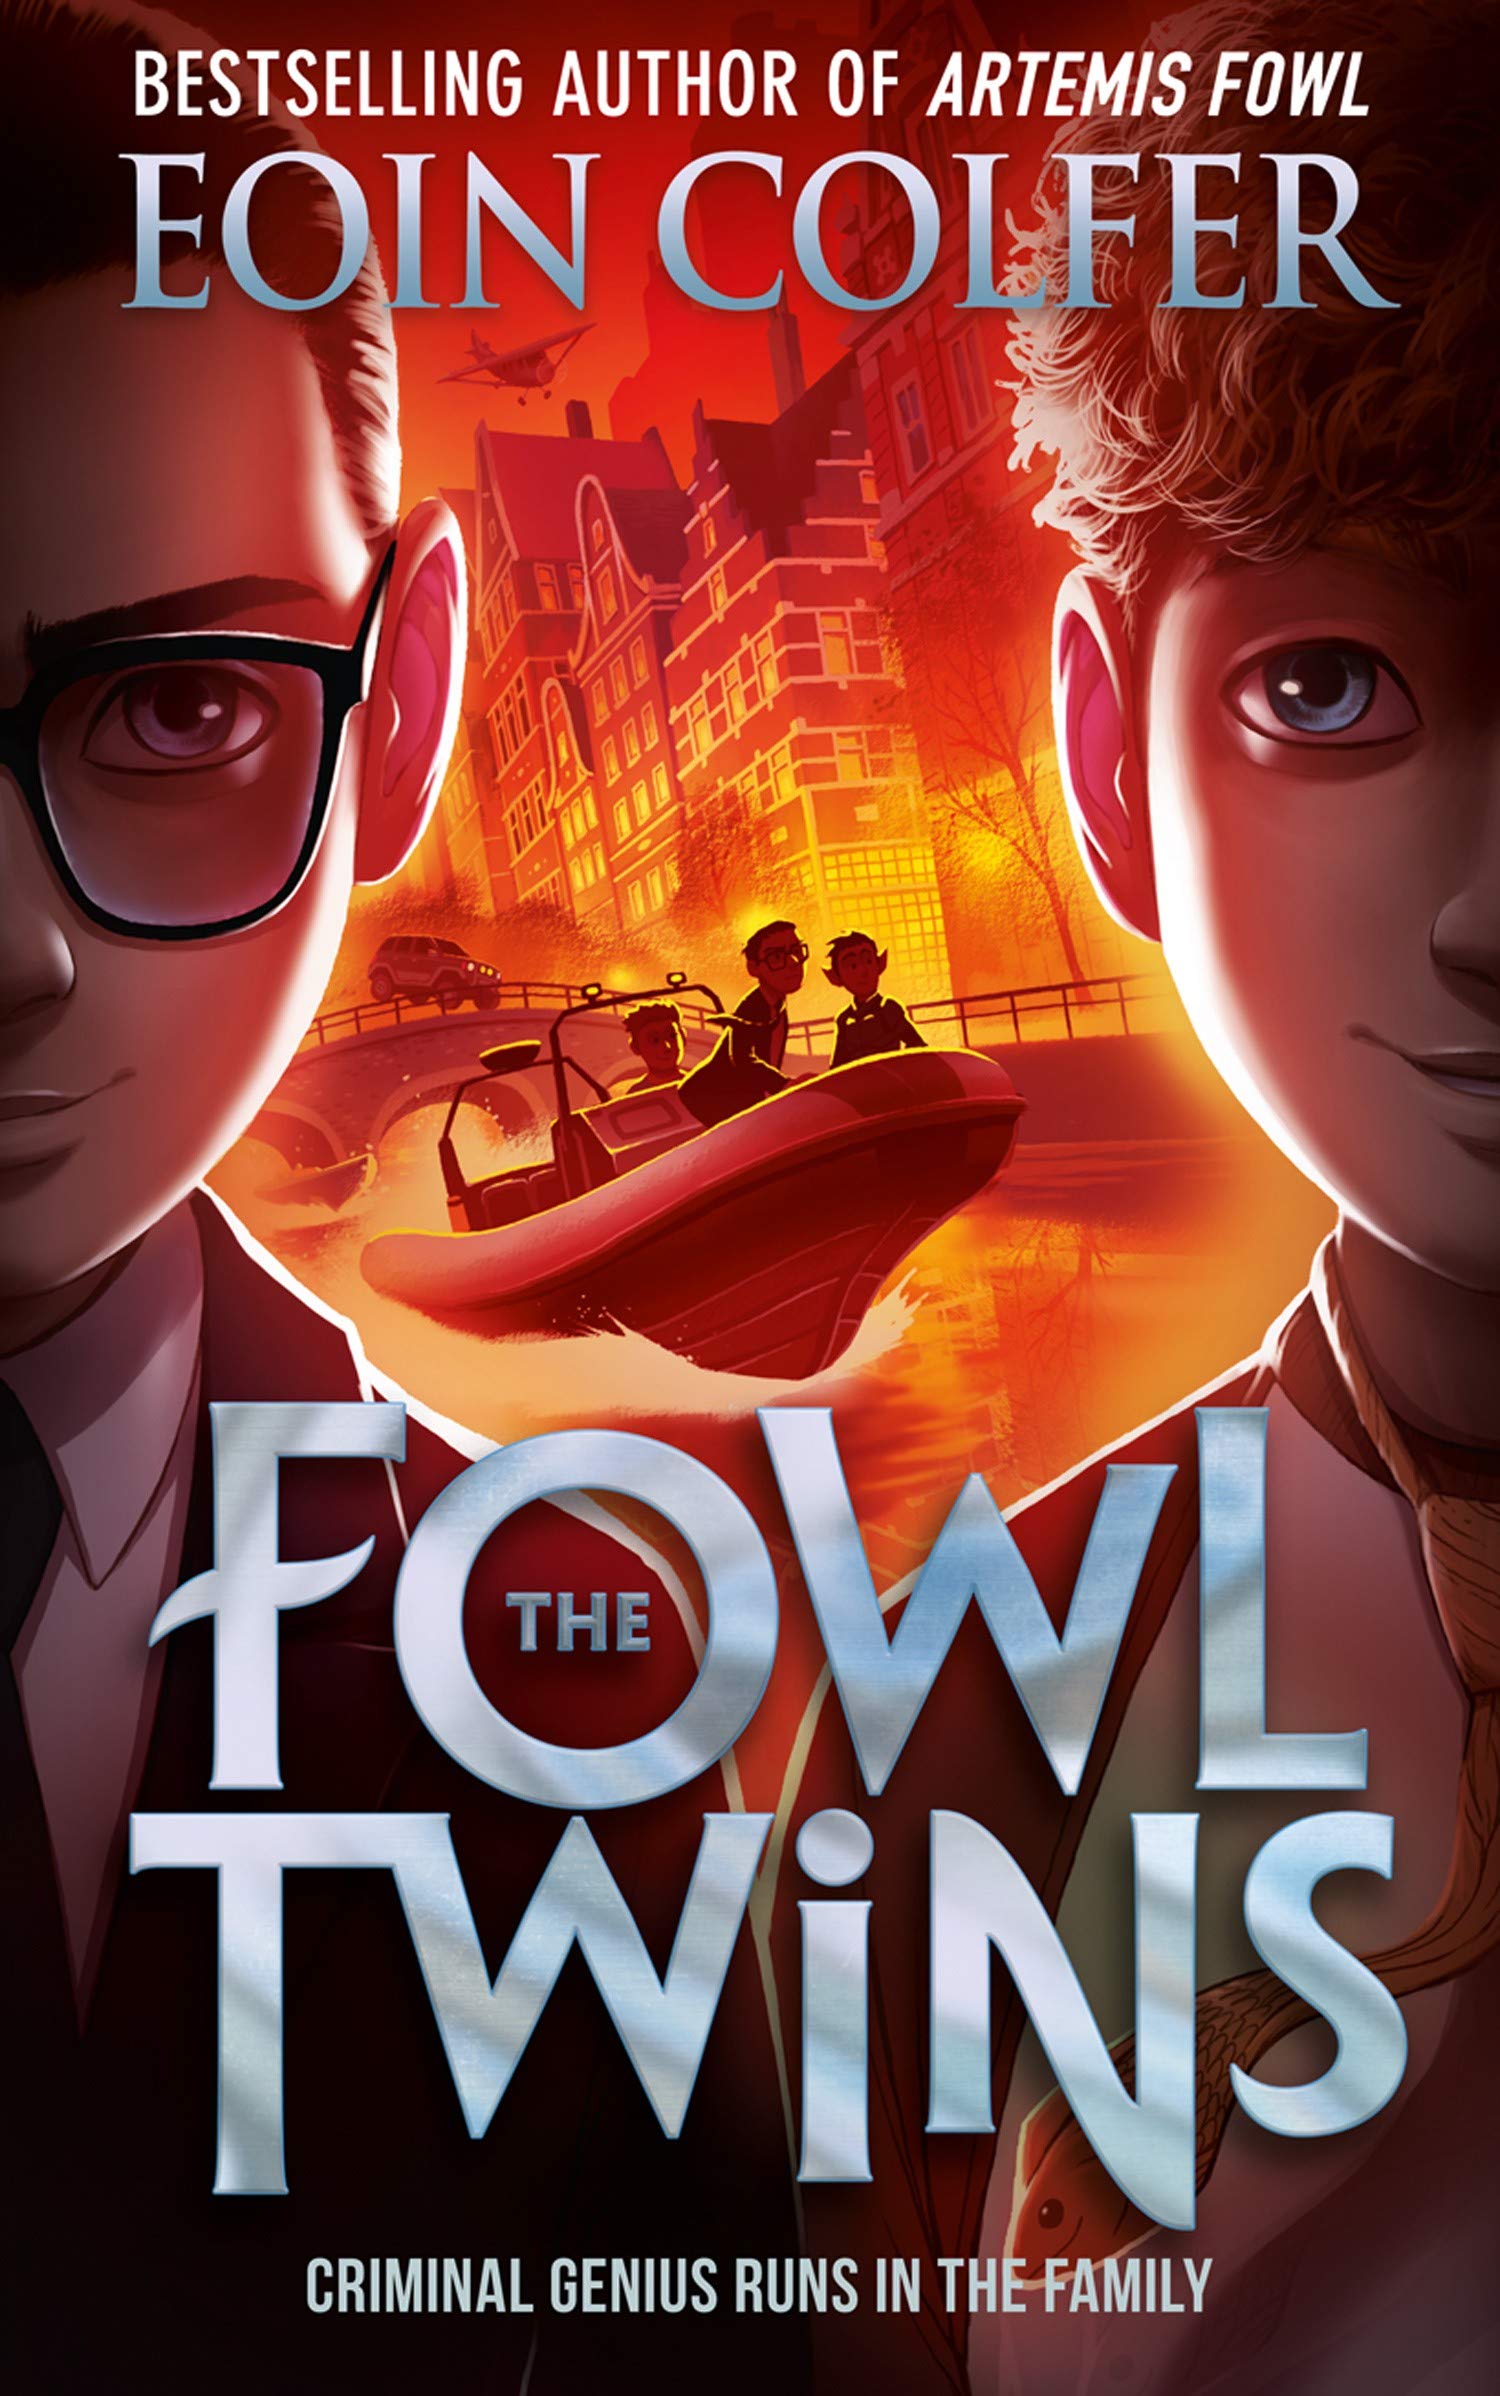 The Fowl Twins | Eoin Colfer